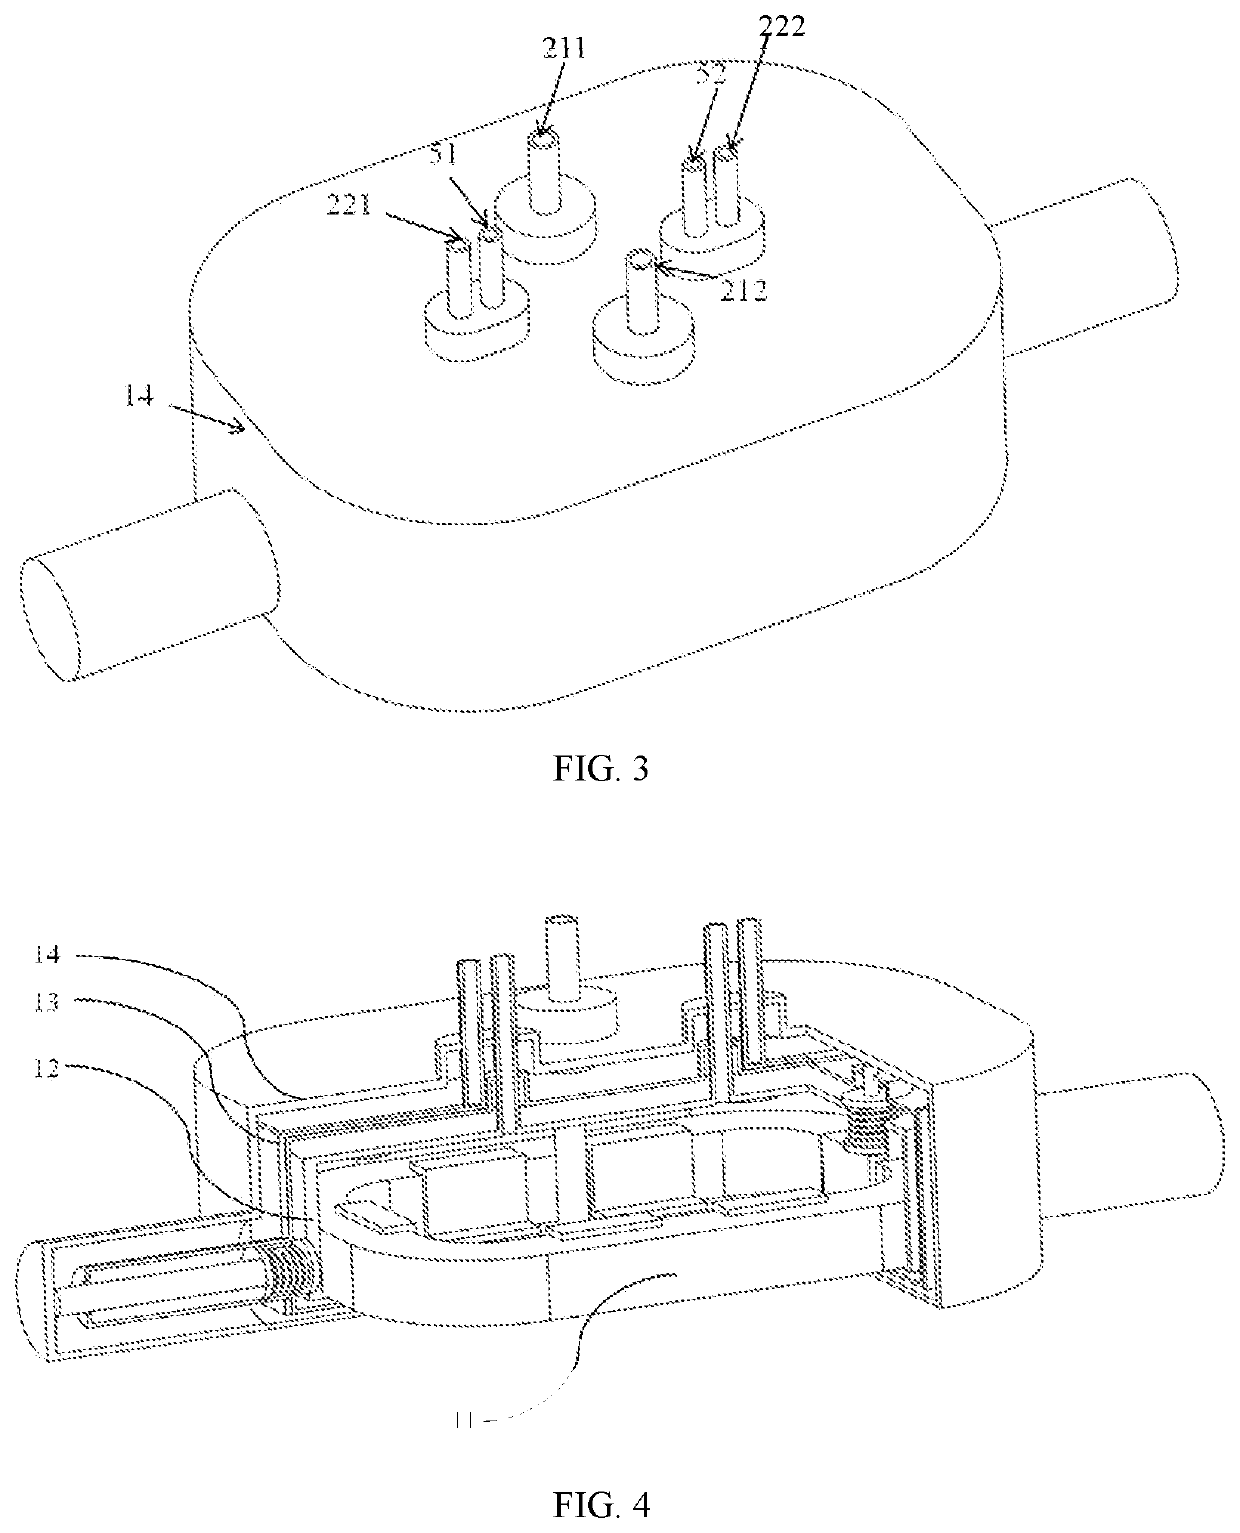 Superconducting eddy-current brake for high-speed train